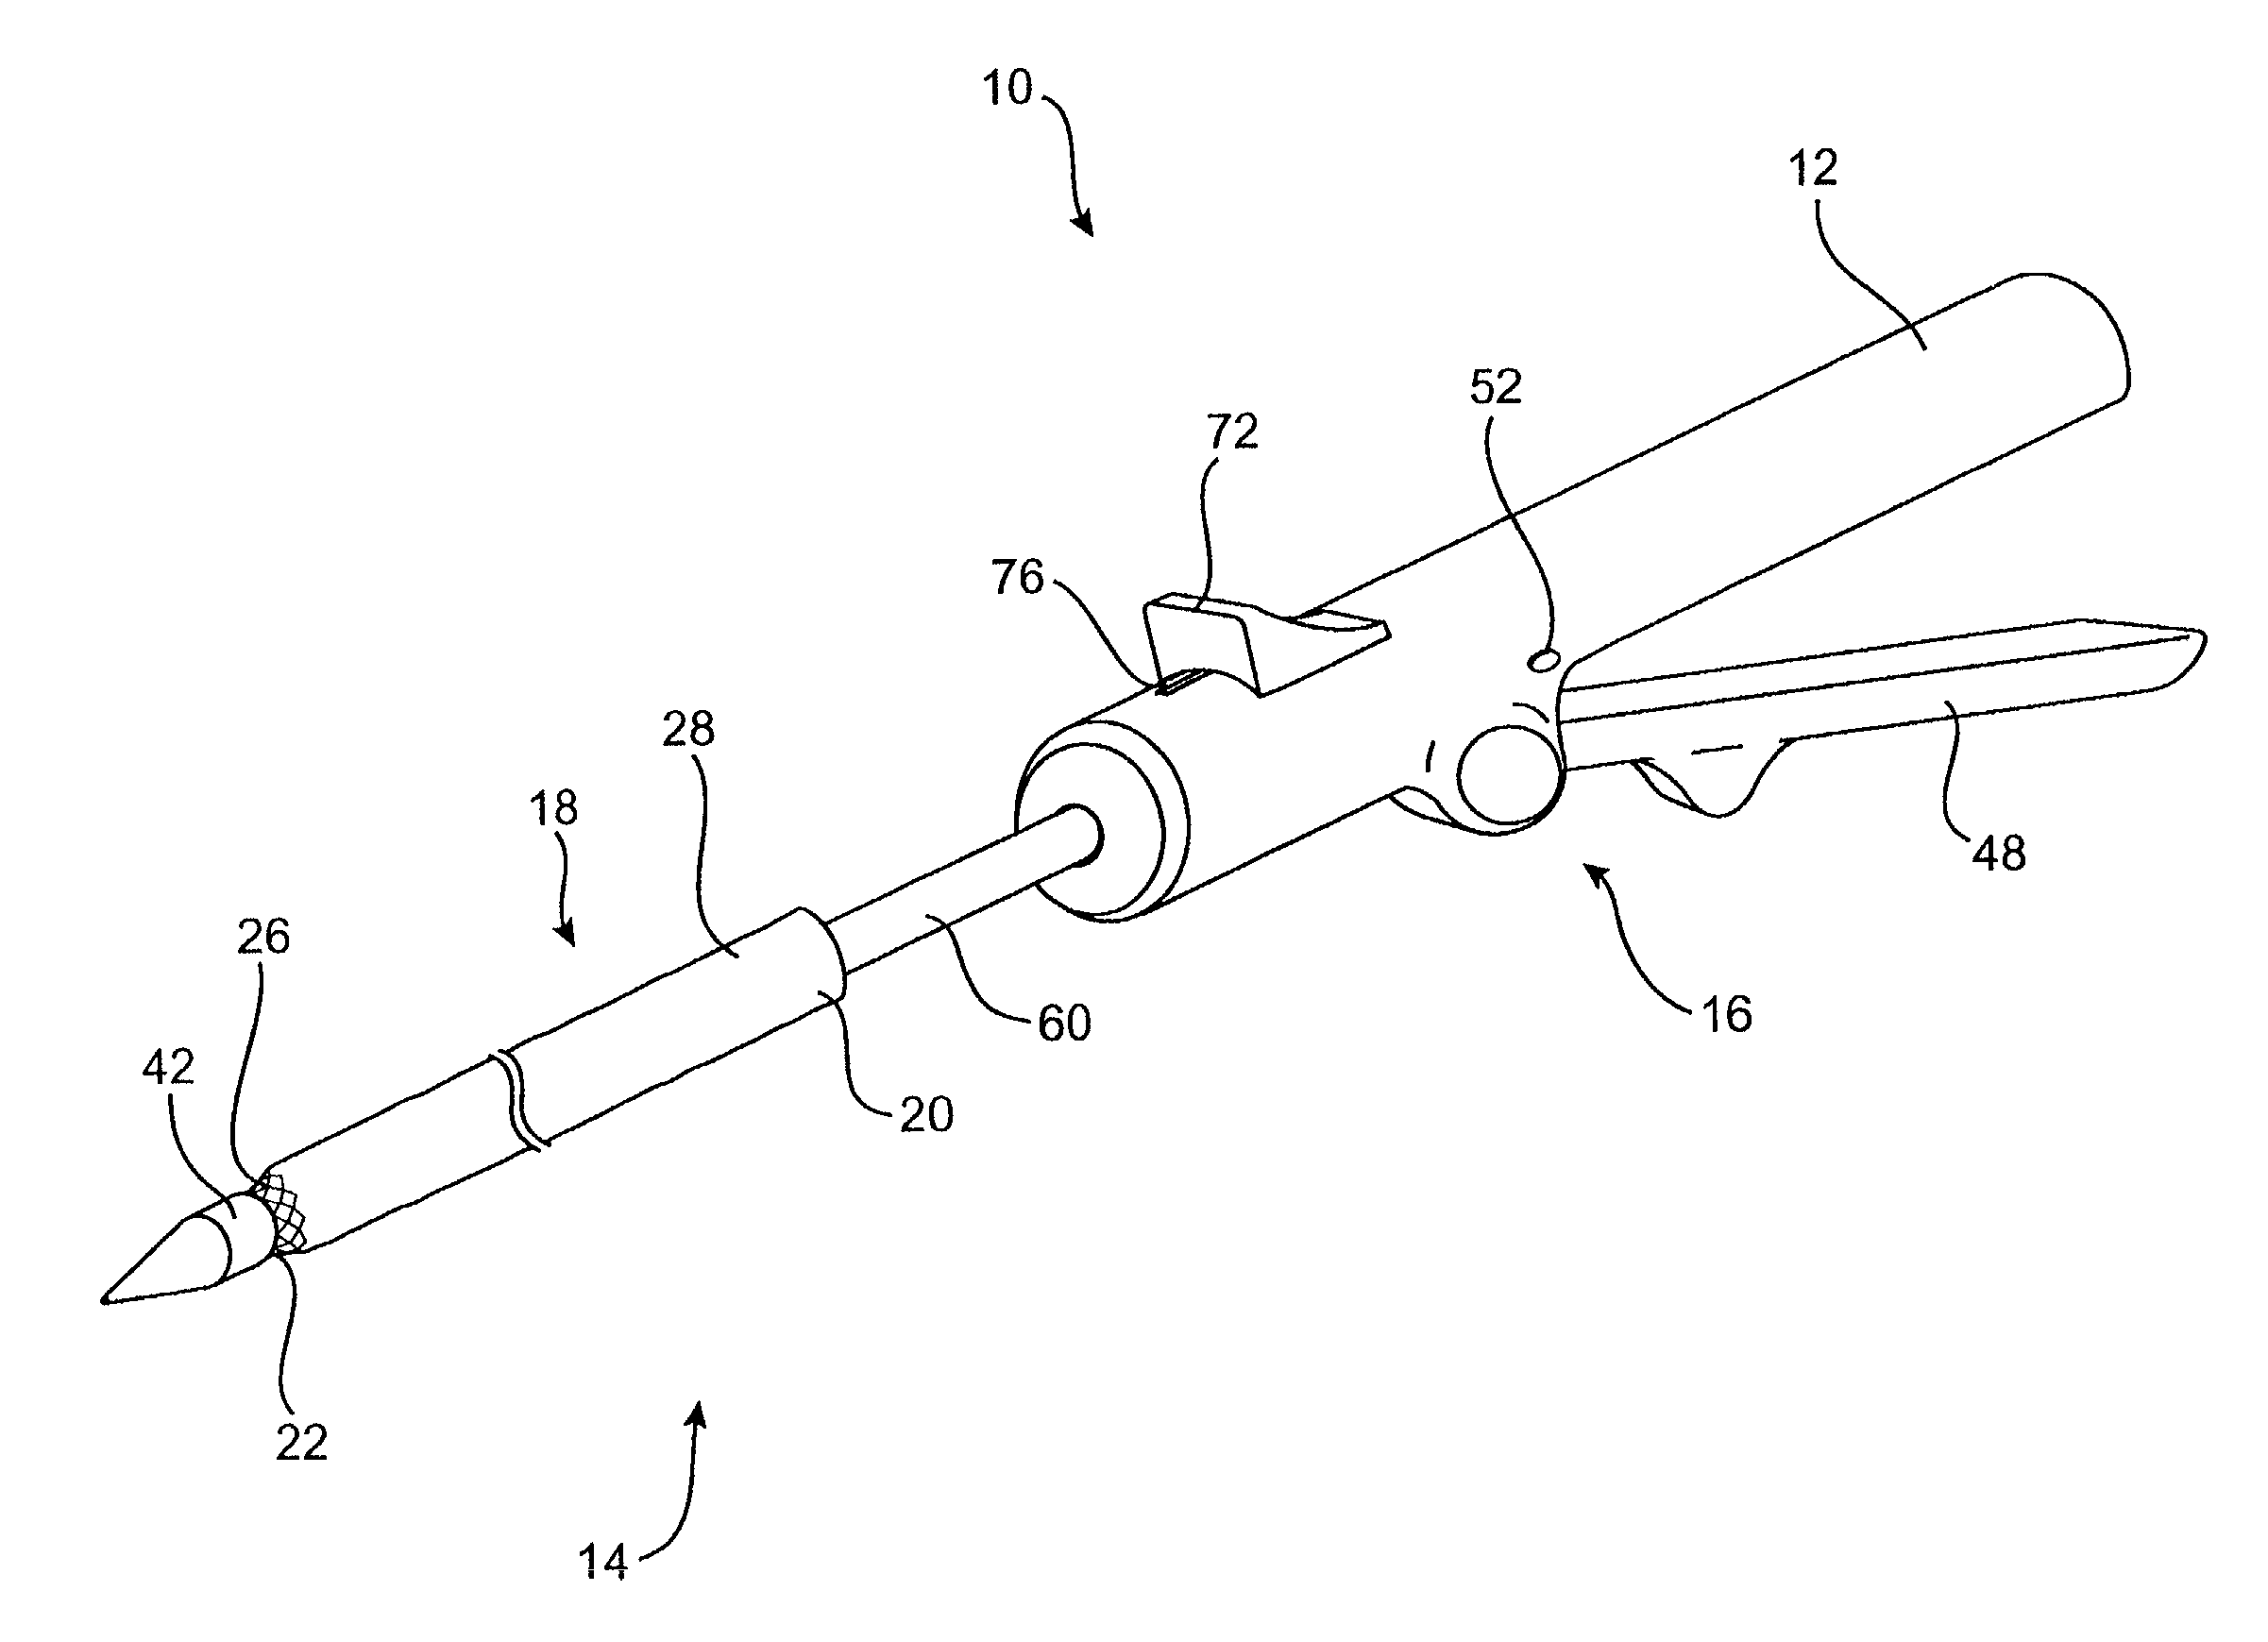 Methods and devices for placing a conduit in fluid communication with a target vessel